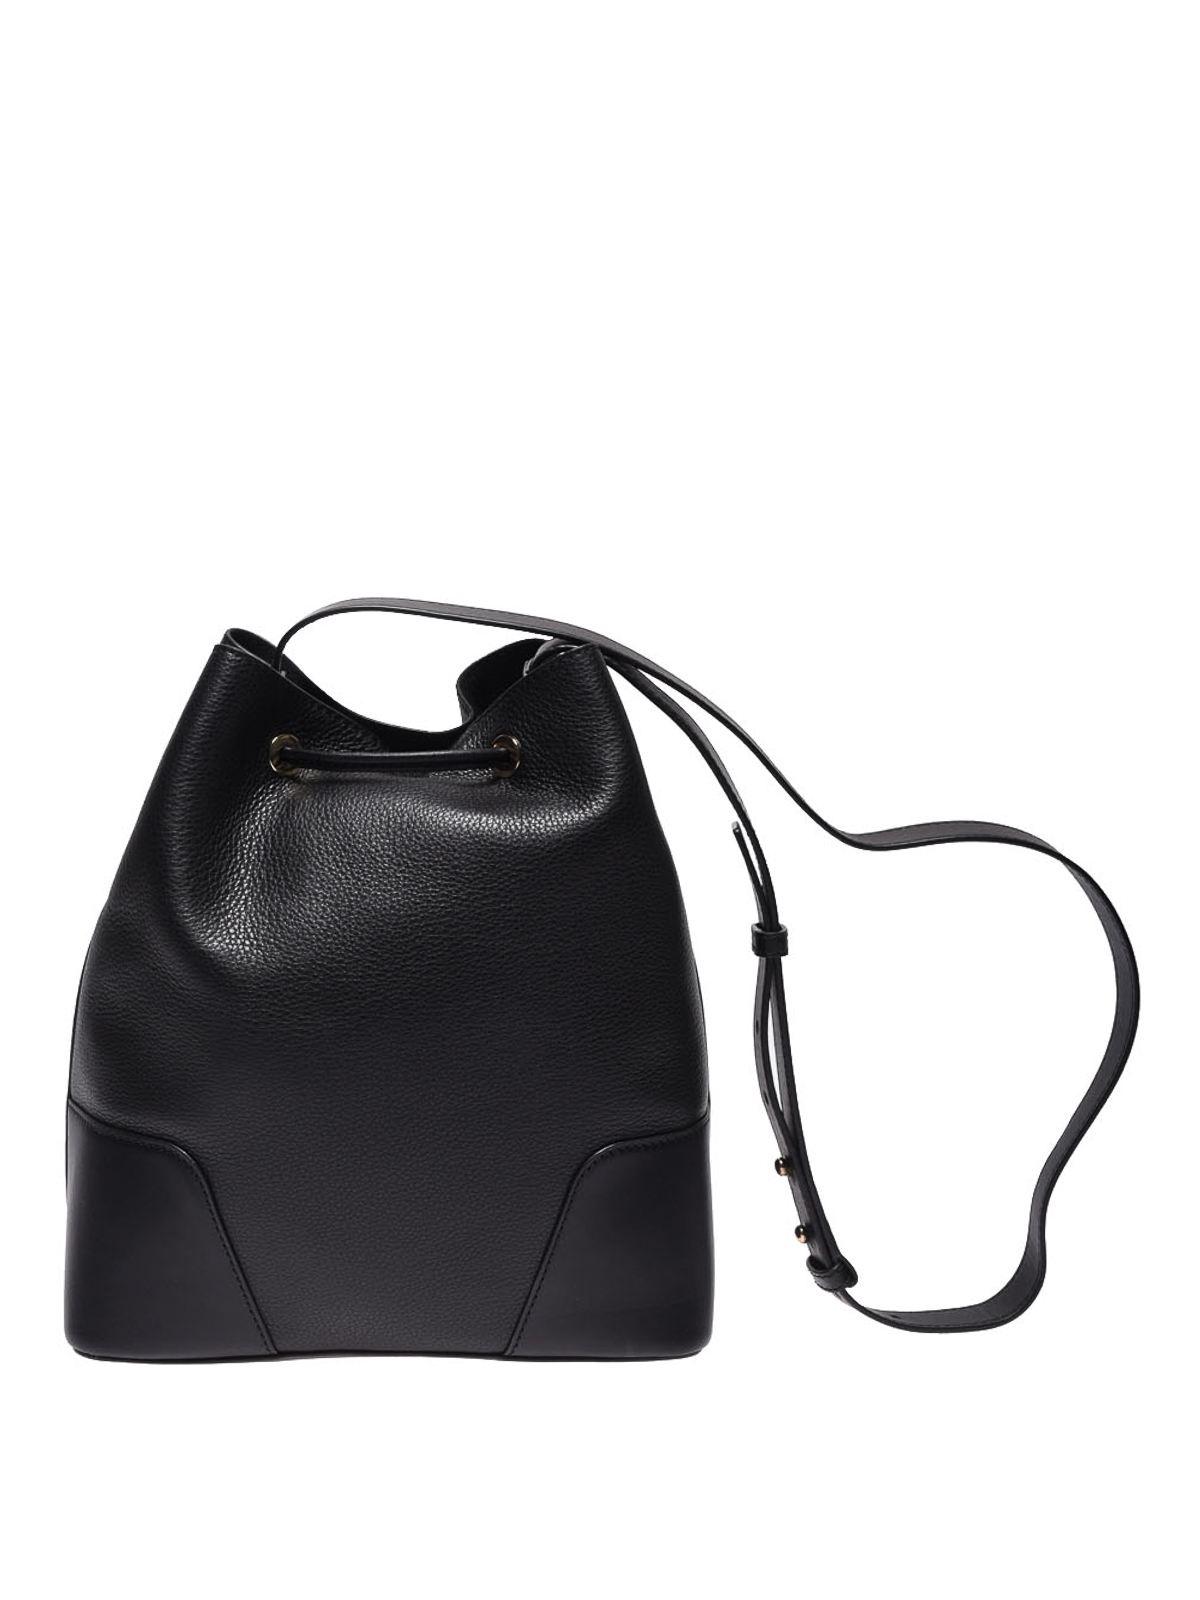 Medium Black and Gold Paco bucket bag in leather